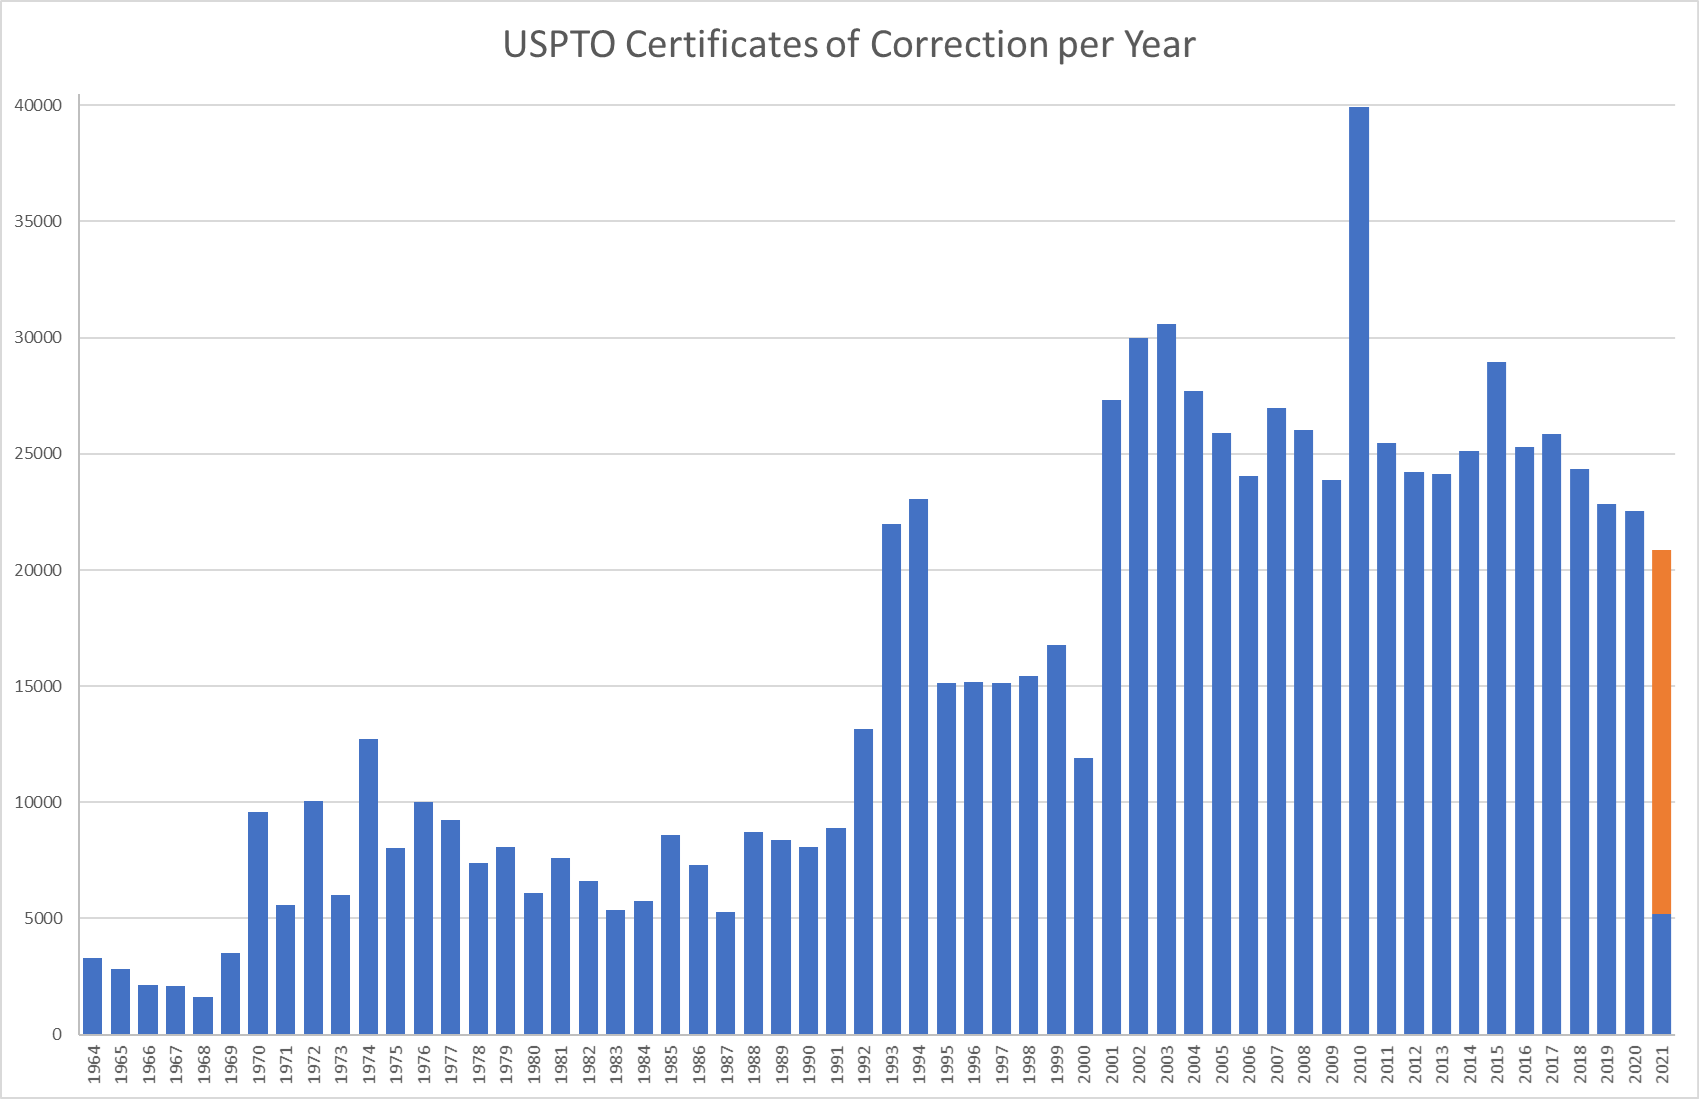 Chart showing certificates of correction per year